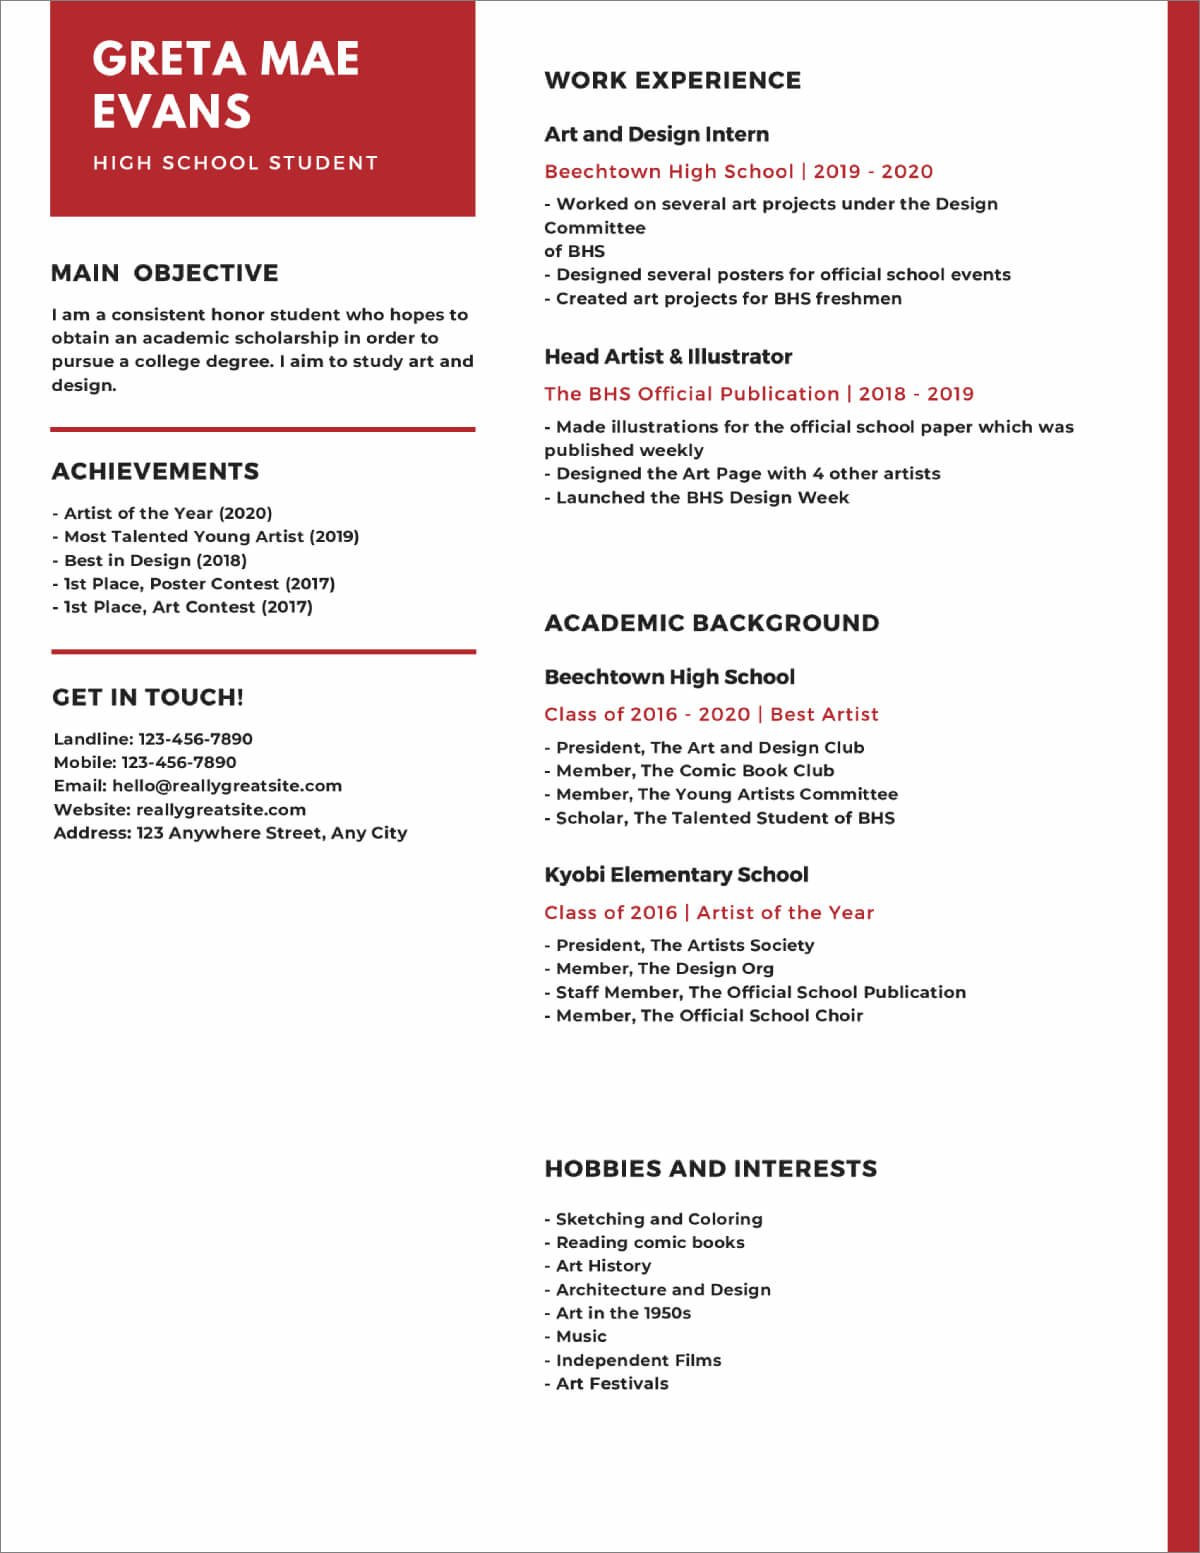 Resume Templates for High School Students Free 20lancarrezekiq High School Resume Templates [download now]